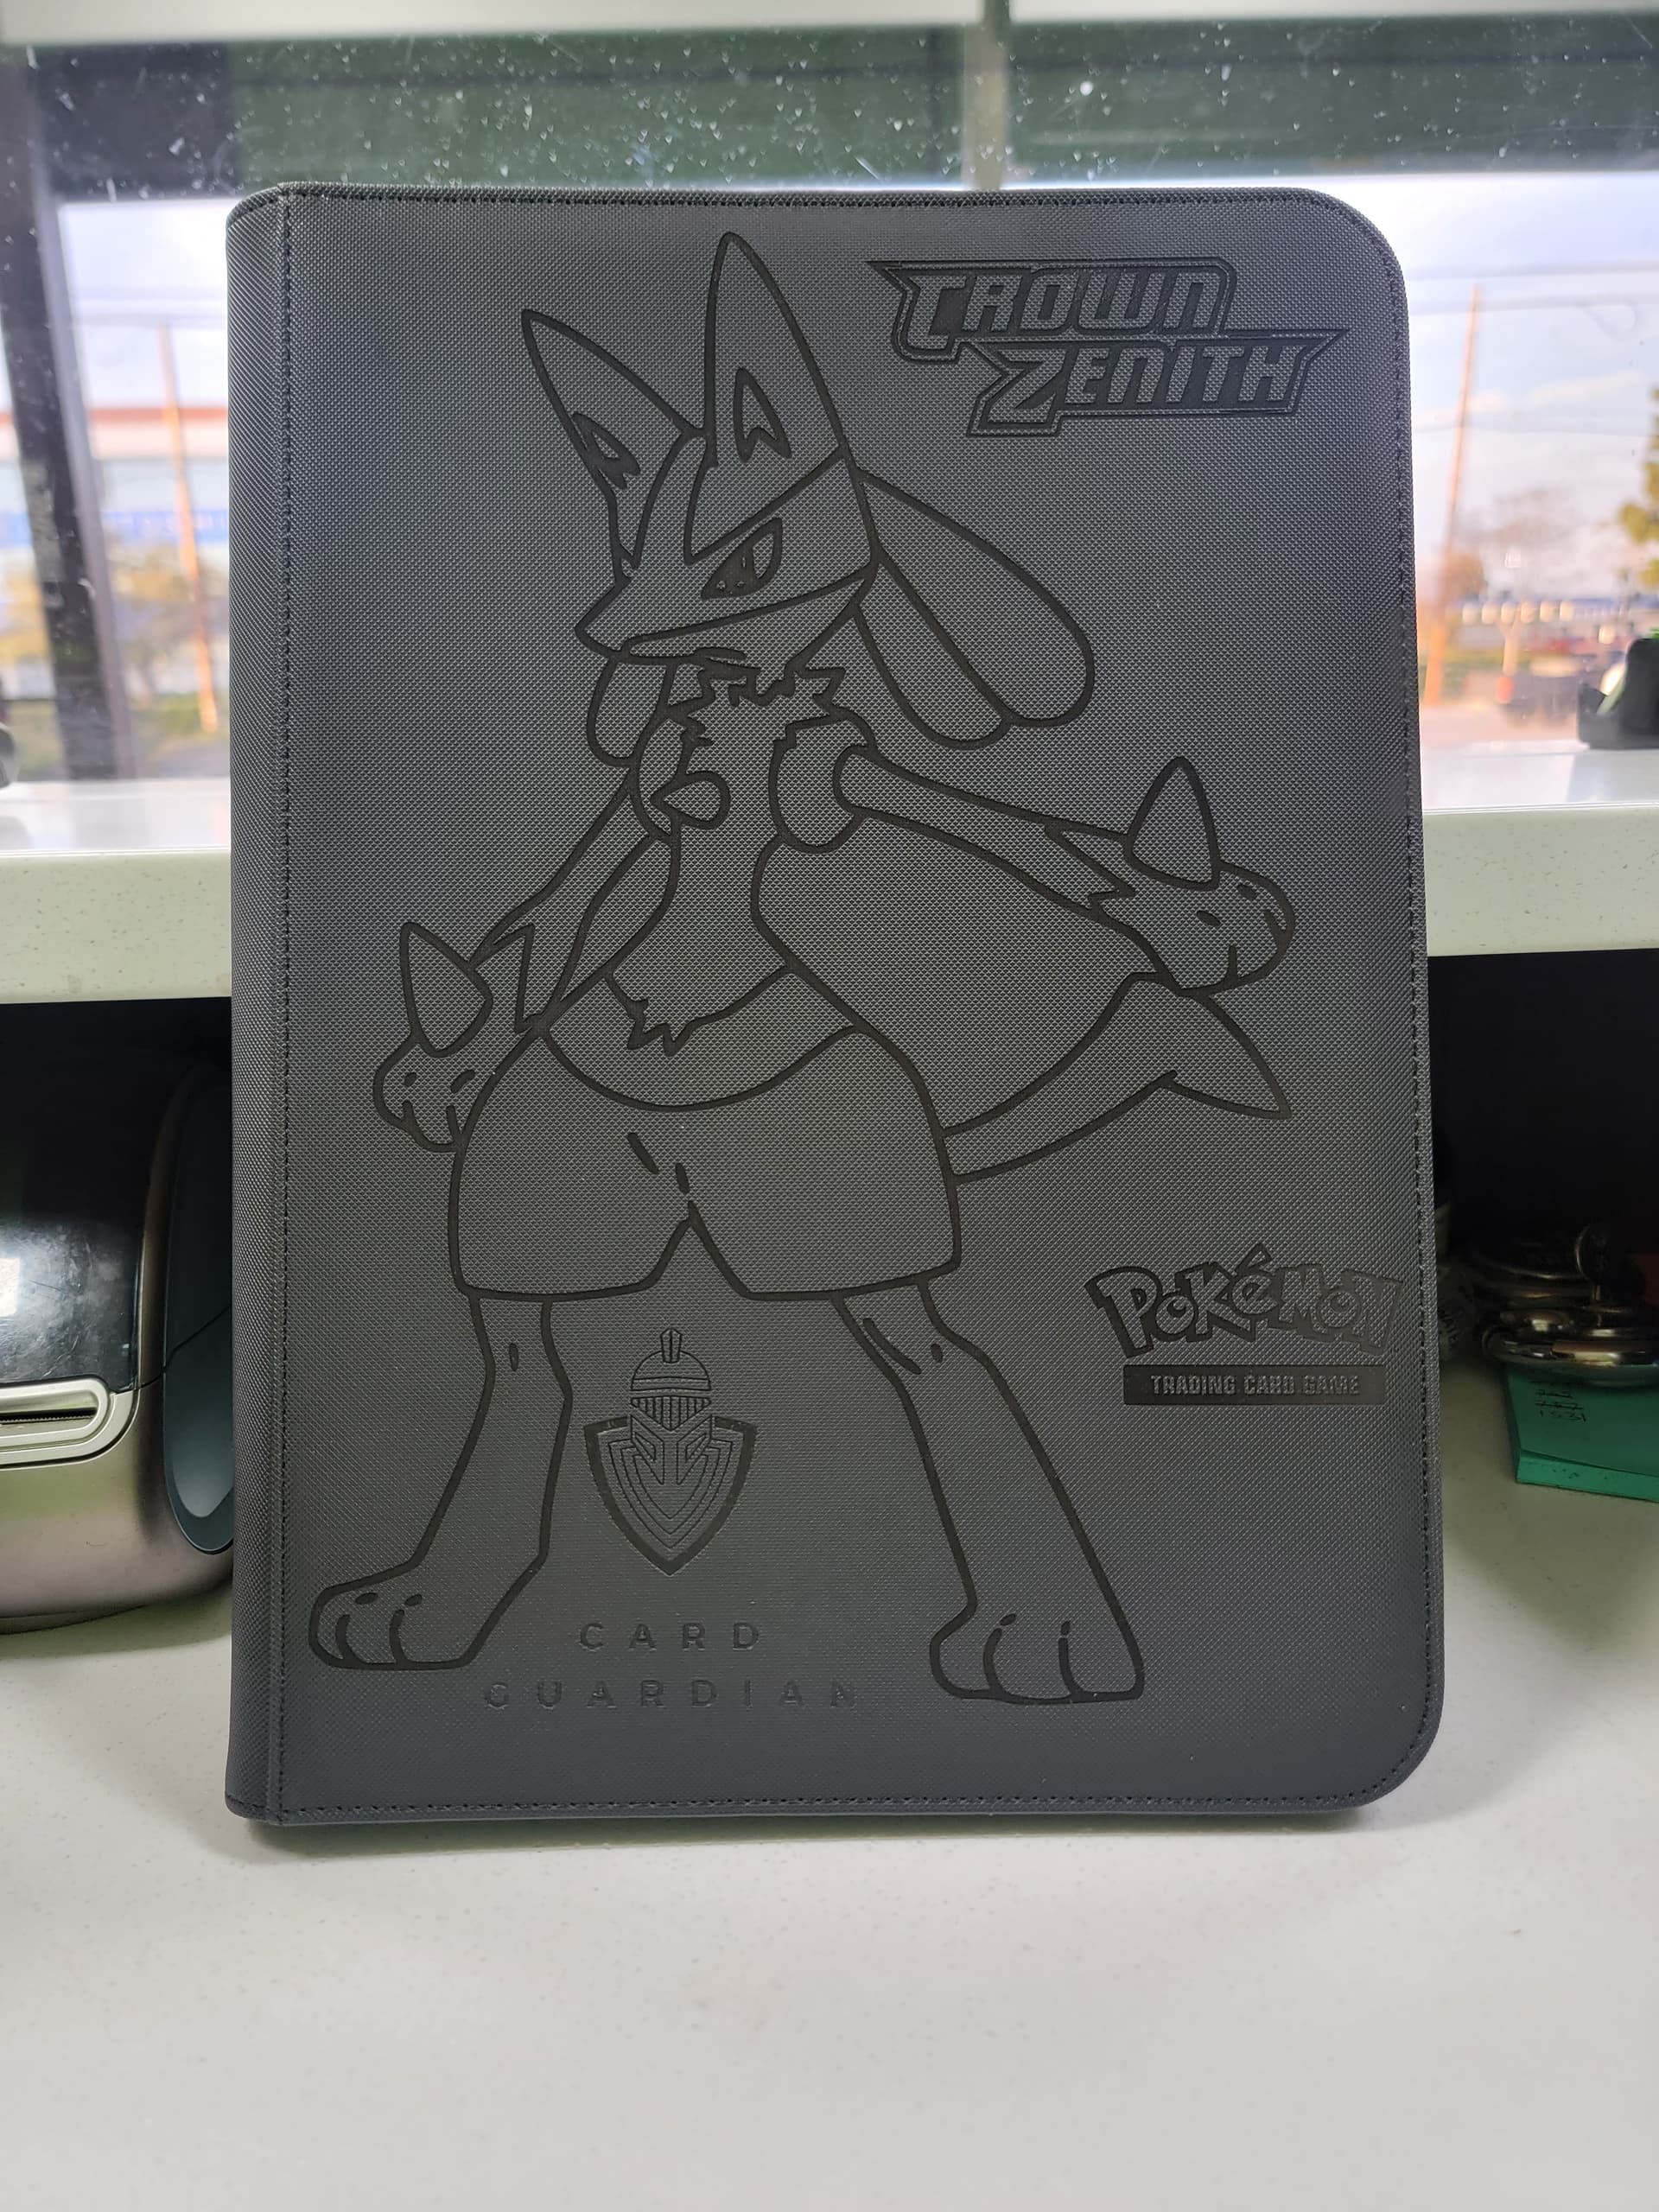 Custom Made】TCG Guard 4-Pocket Binder for Pokemon Cards with Sleeves